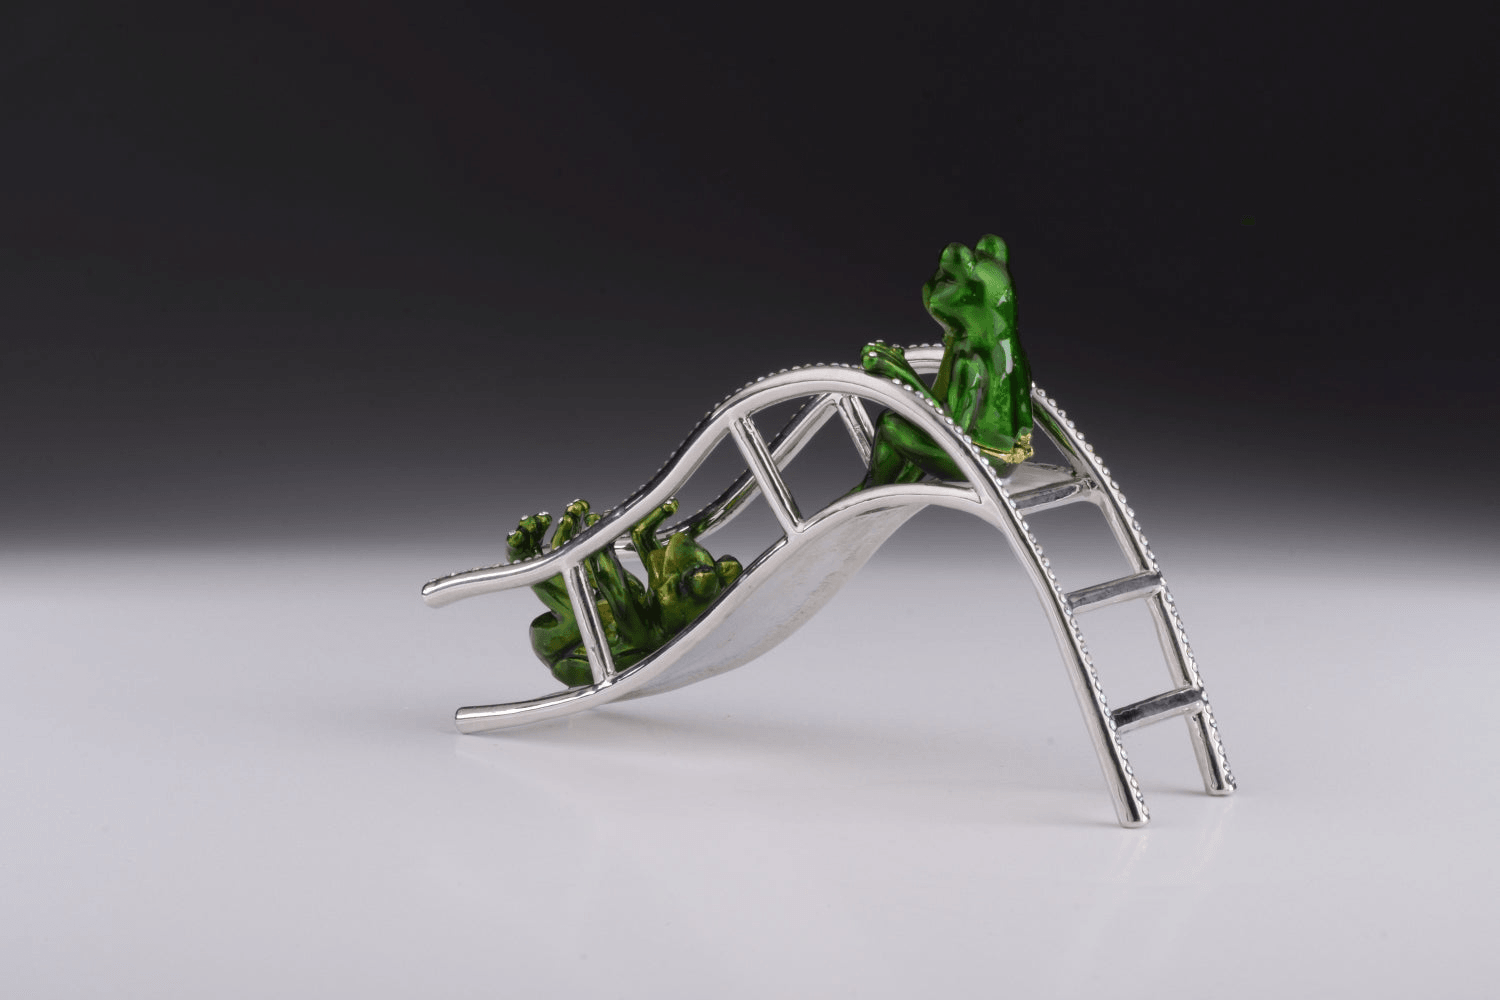 Two Frogs Riding Slide  